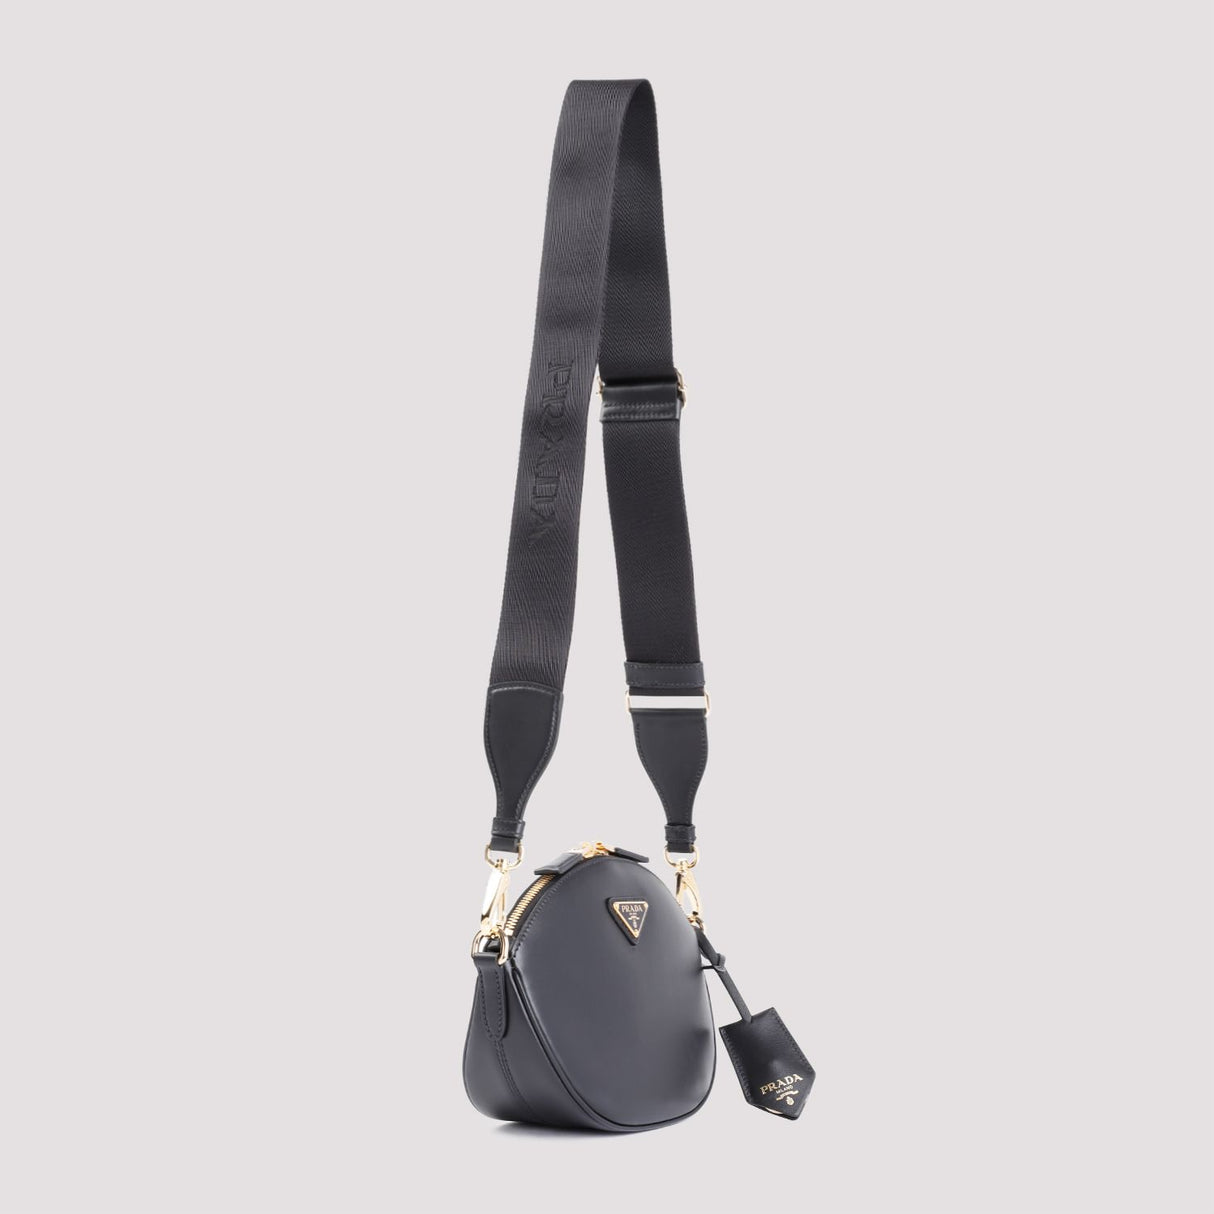 PRADA Classic Black Leather Mini Crossbody Bag with Gold-Tone Accents and Adjustable Strap, 18 cm